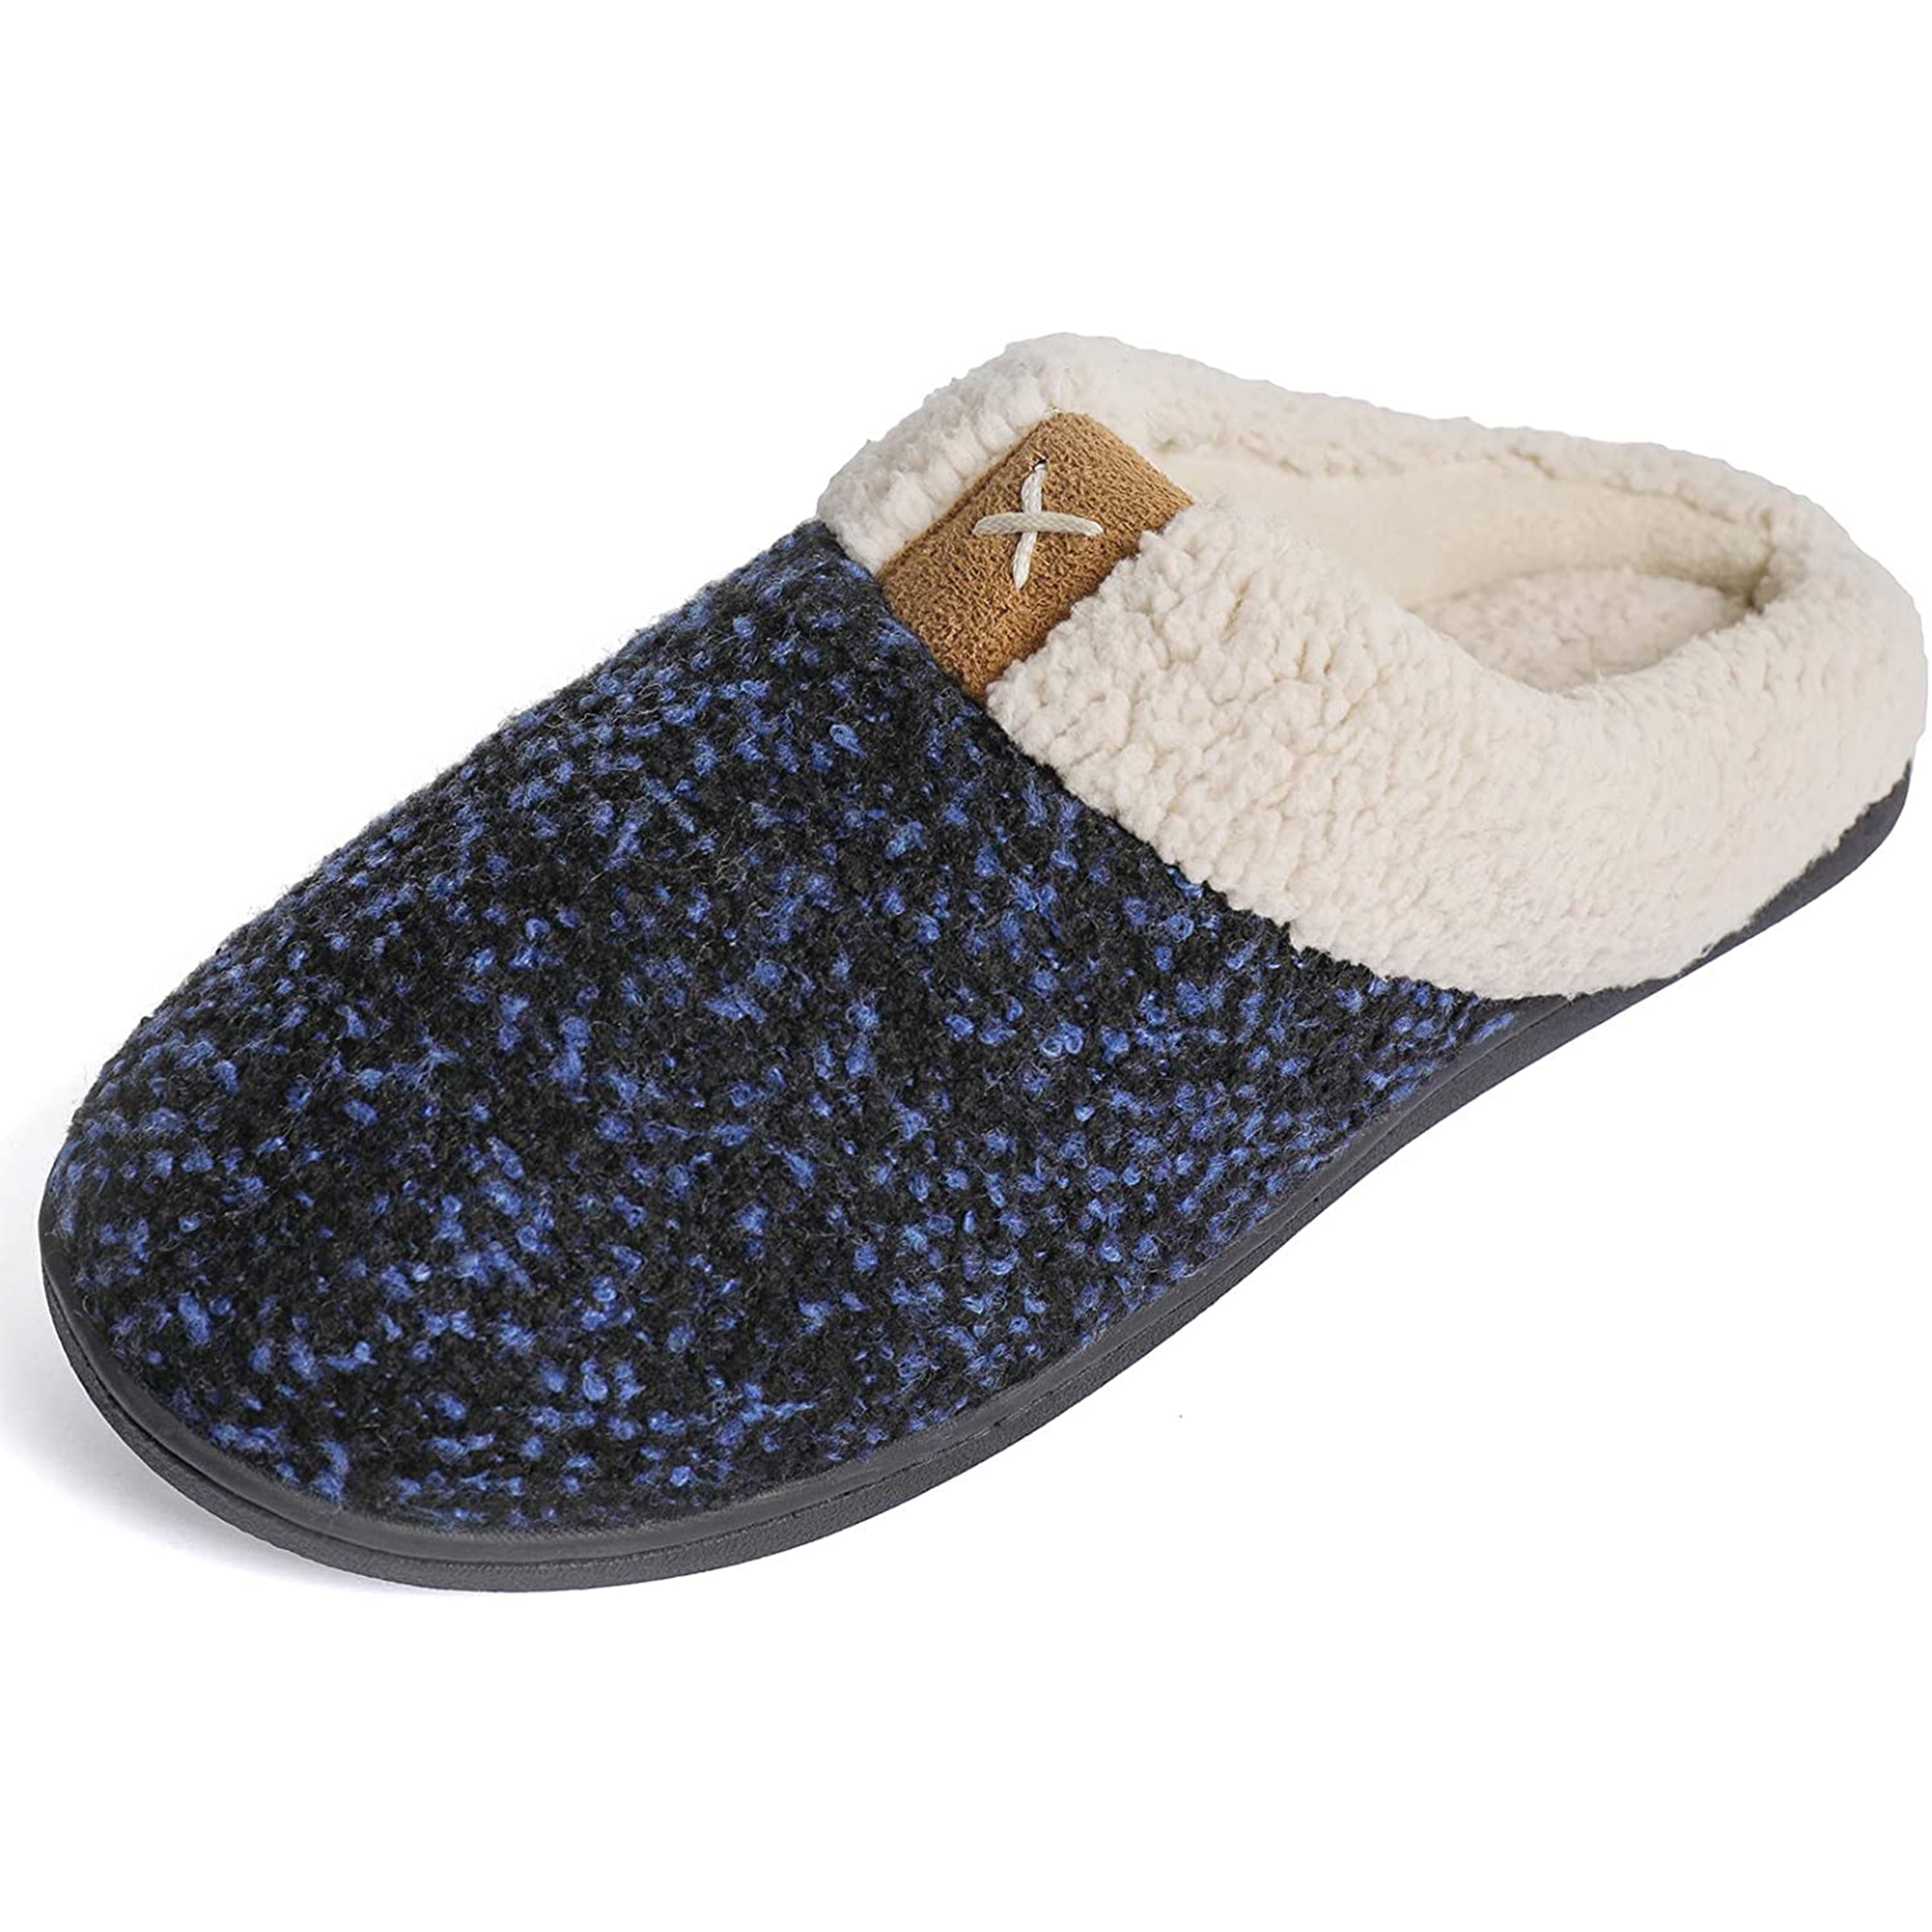 Outdoor Anti-Skid Rubber Sole NDB Mens & Womens Comfort Memory Foam Slippers Plush Fleece Lined House Shoes w/Indoor 